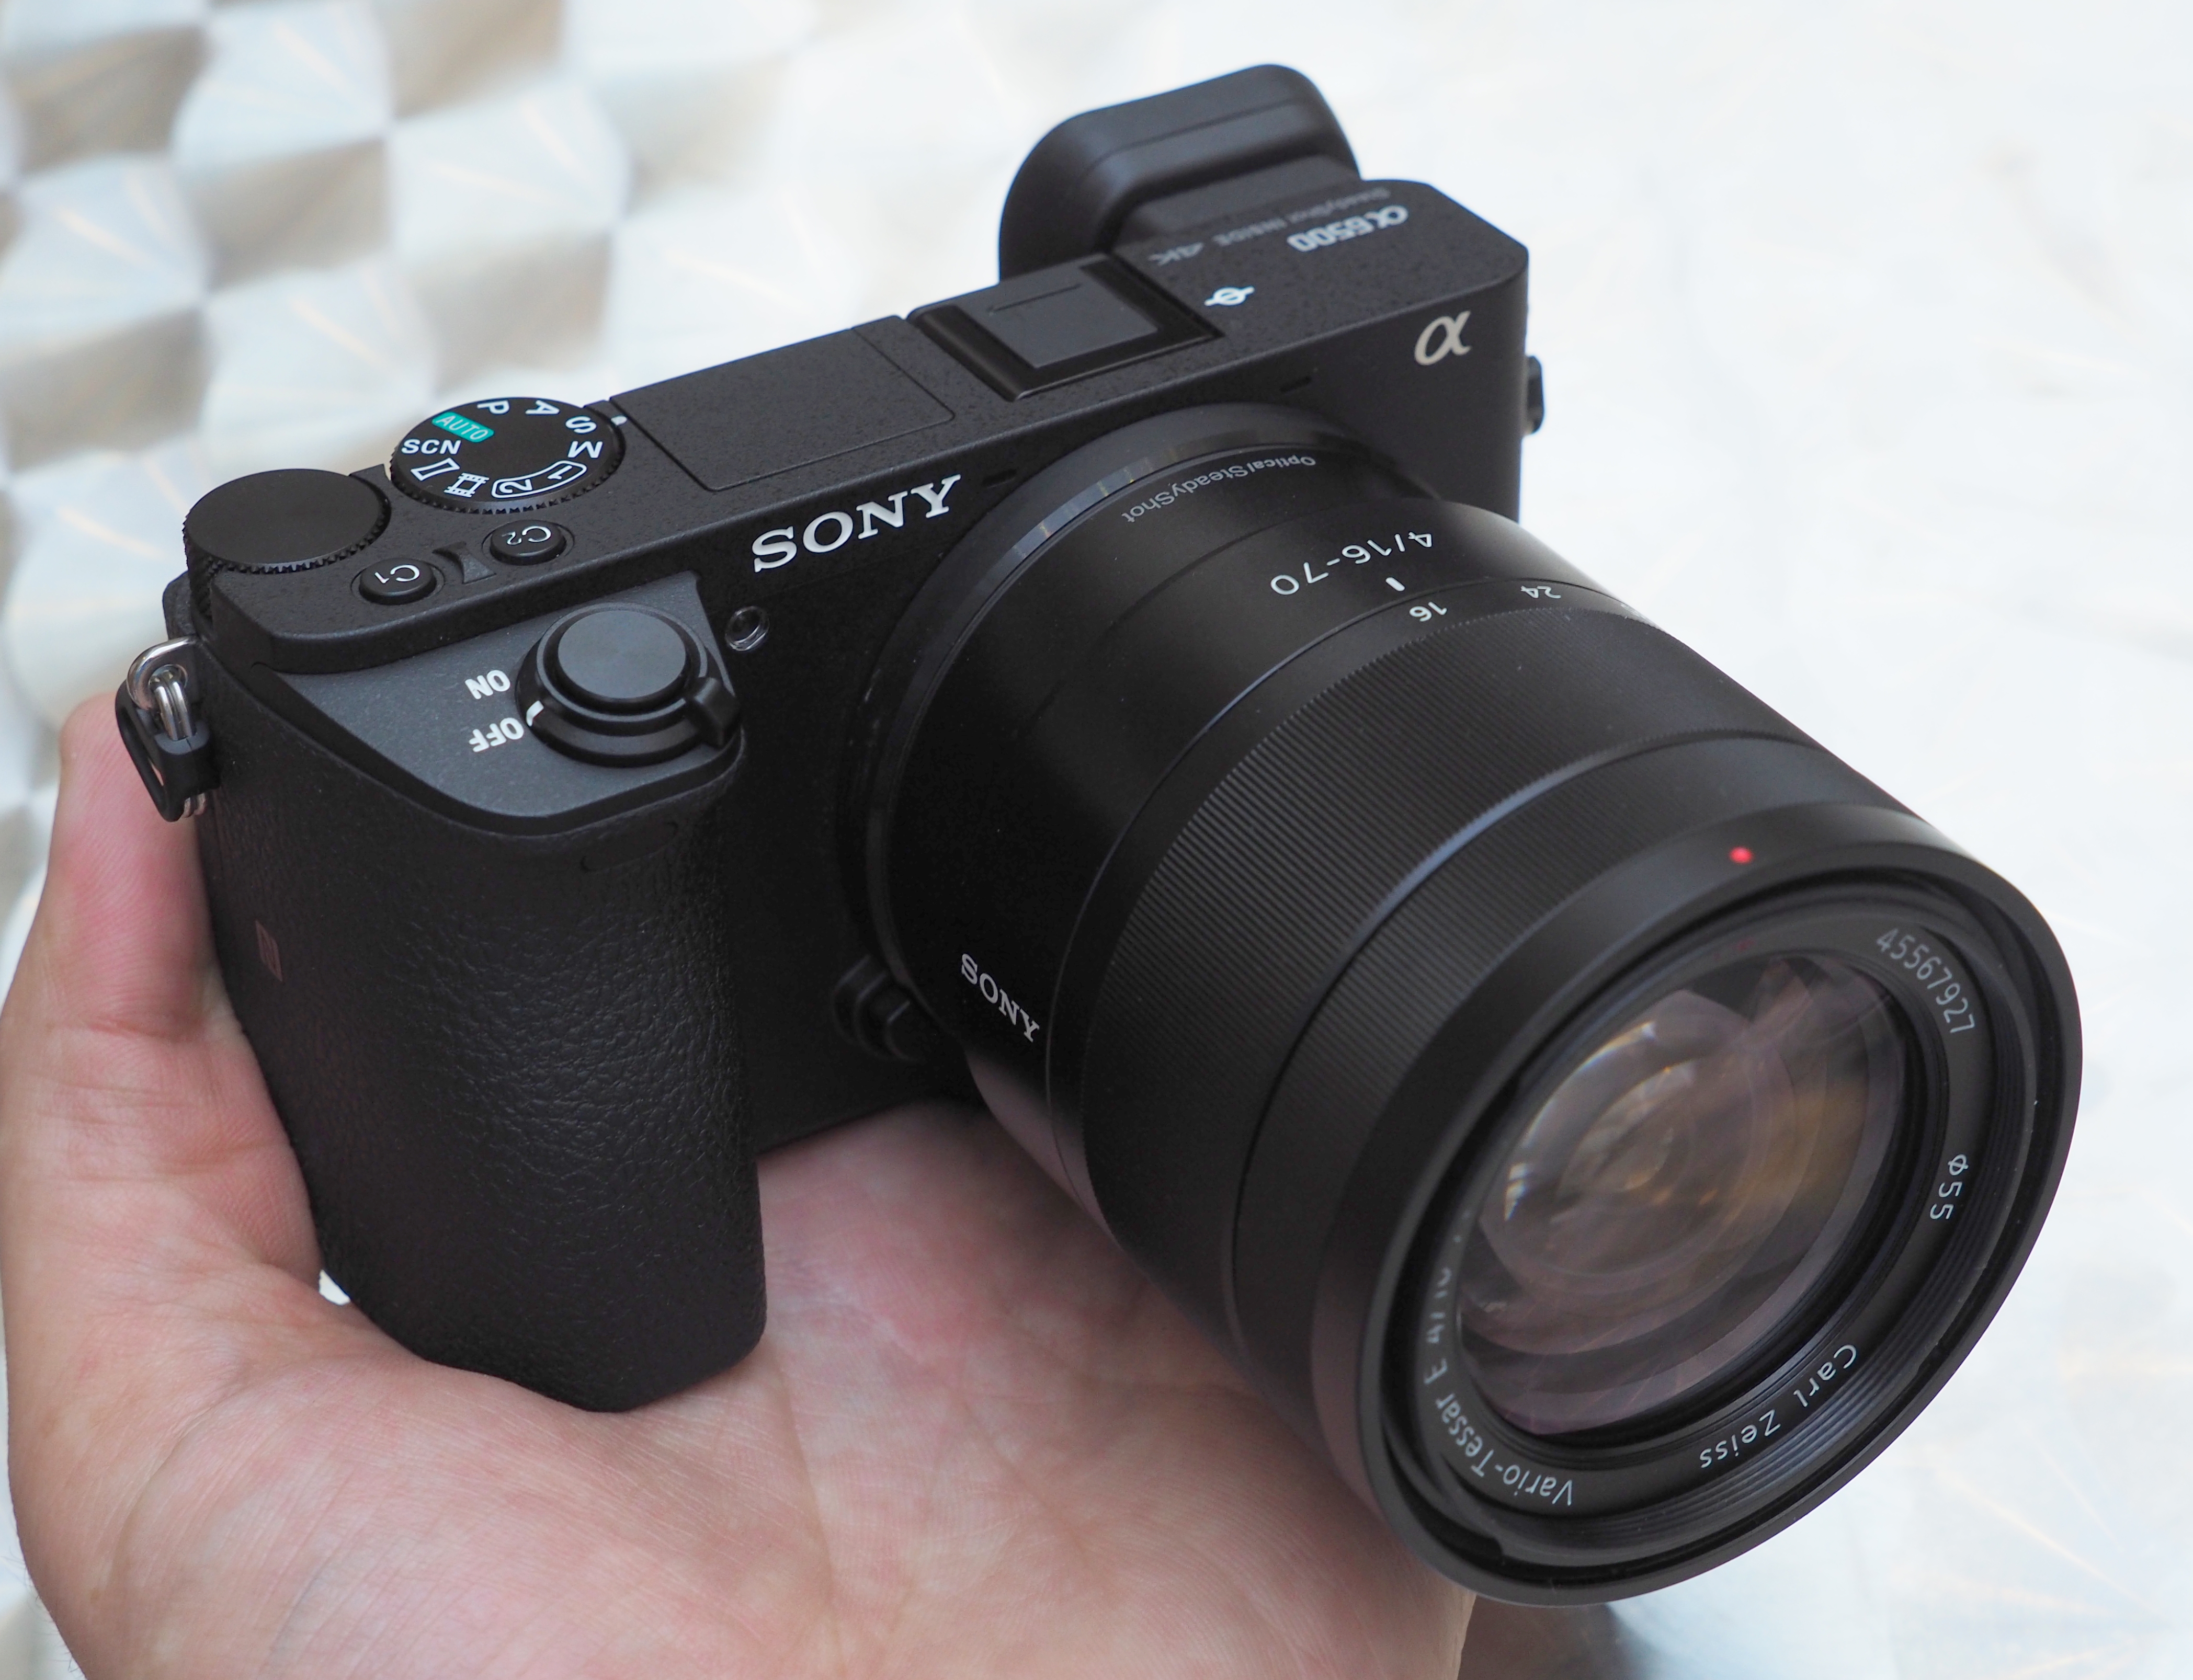 Unboxing - Sony 16-70mm f/4 OSS Lens (with sample pictures)